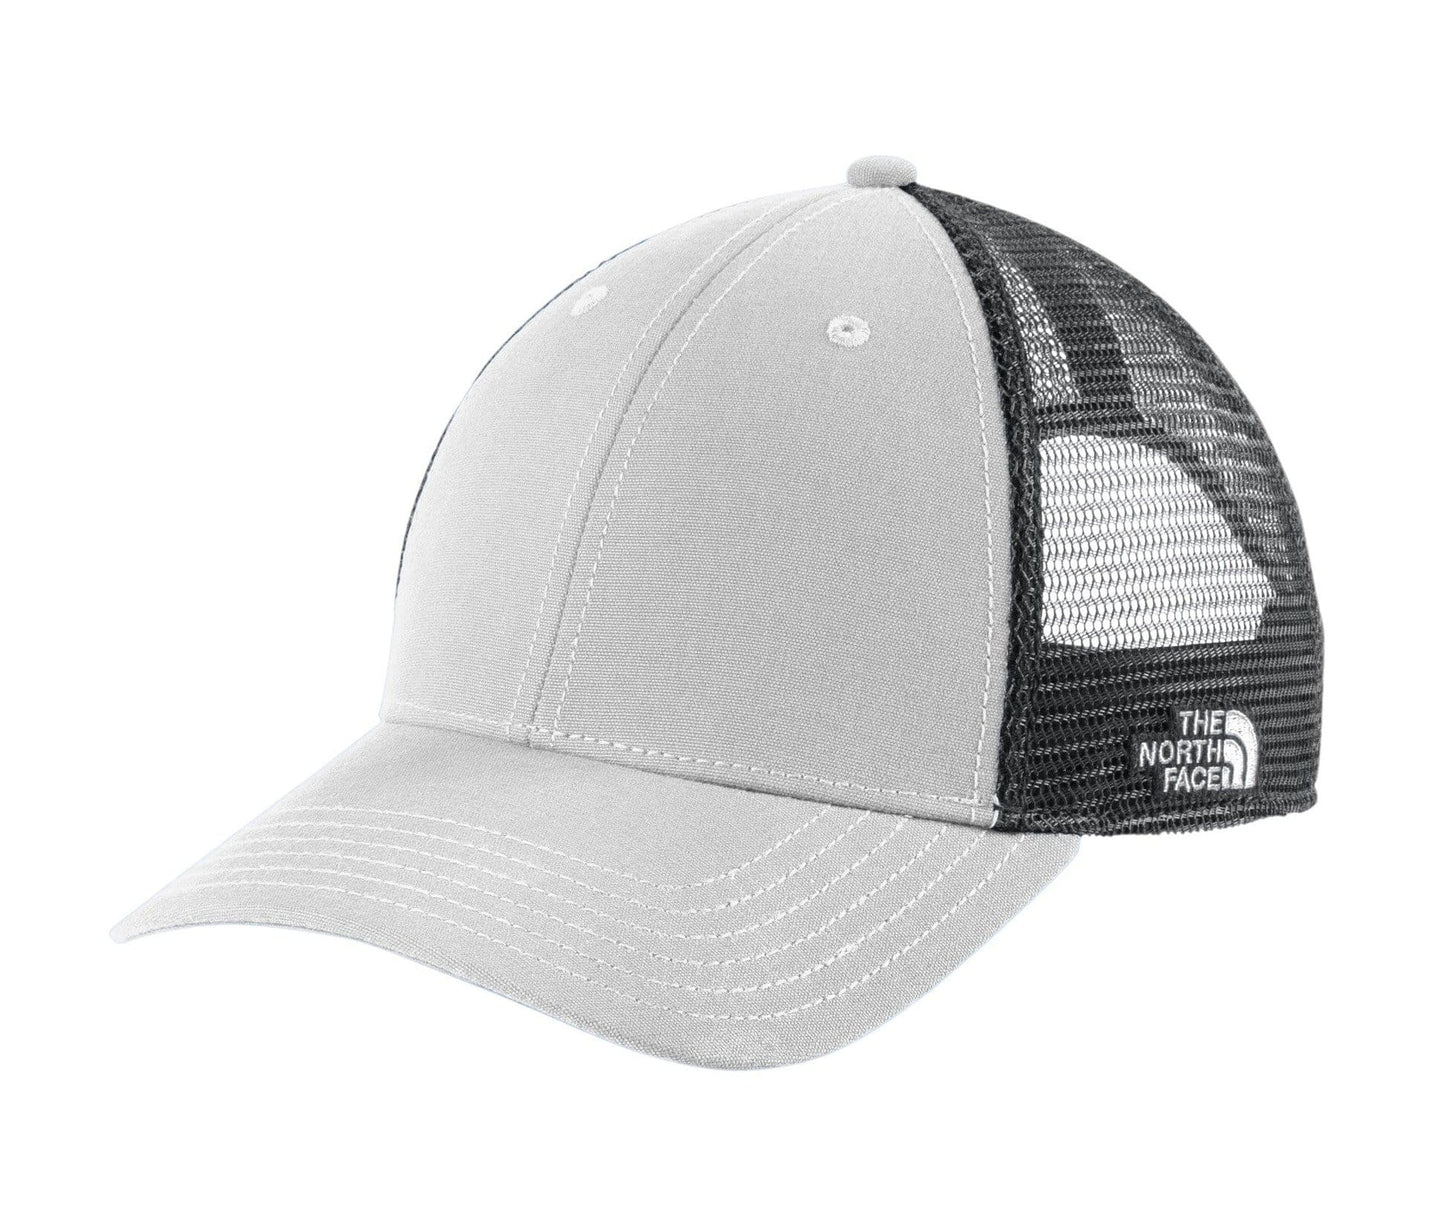 The North Face - Ultimate Trucker Cap